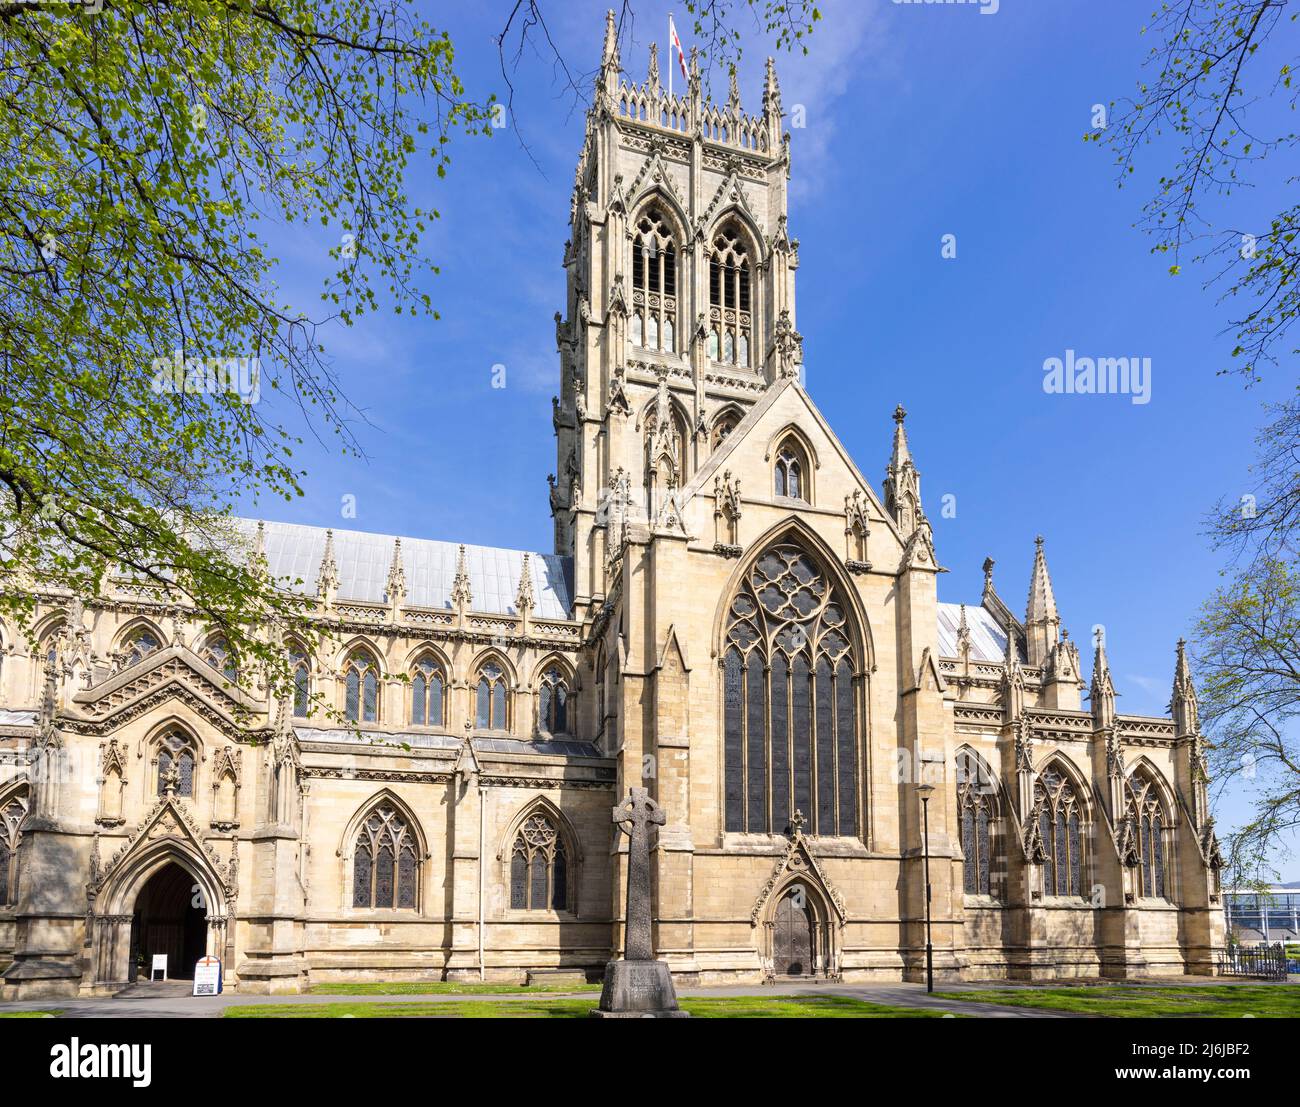 The Minster Church of St George or Doncaster Minster Doncaster South Yorkshire England uk gb Europe Stock Photo